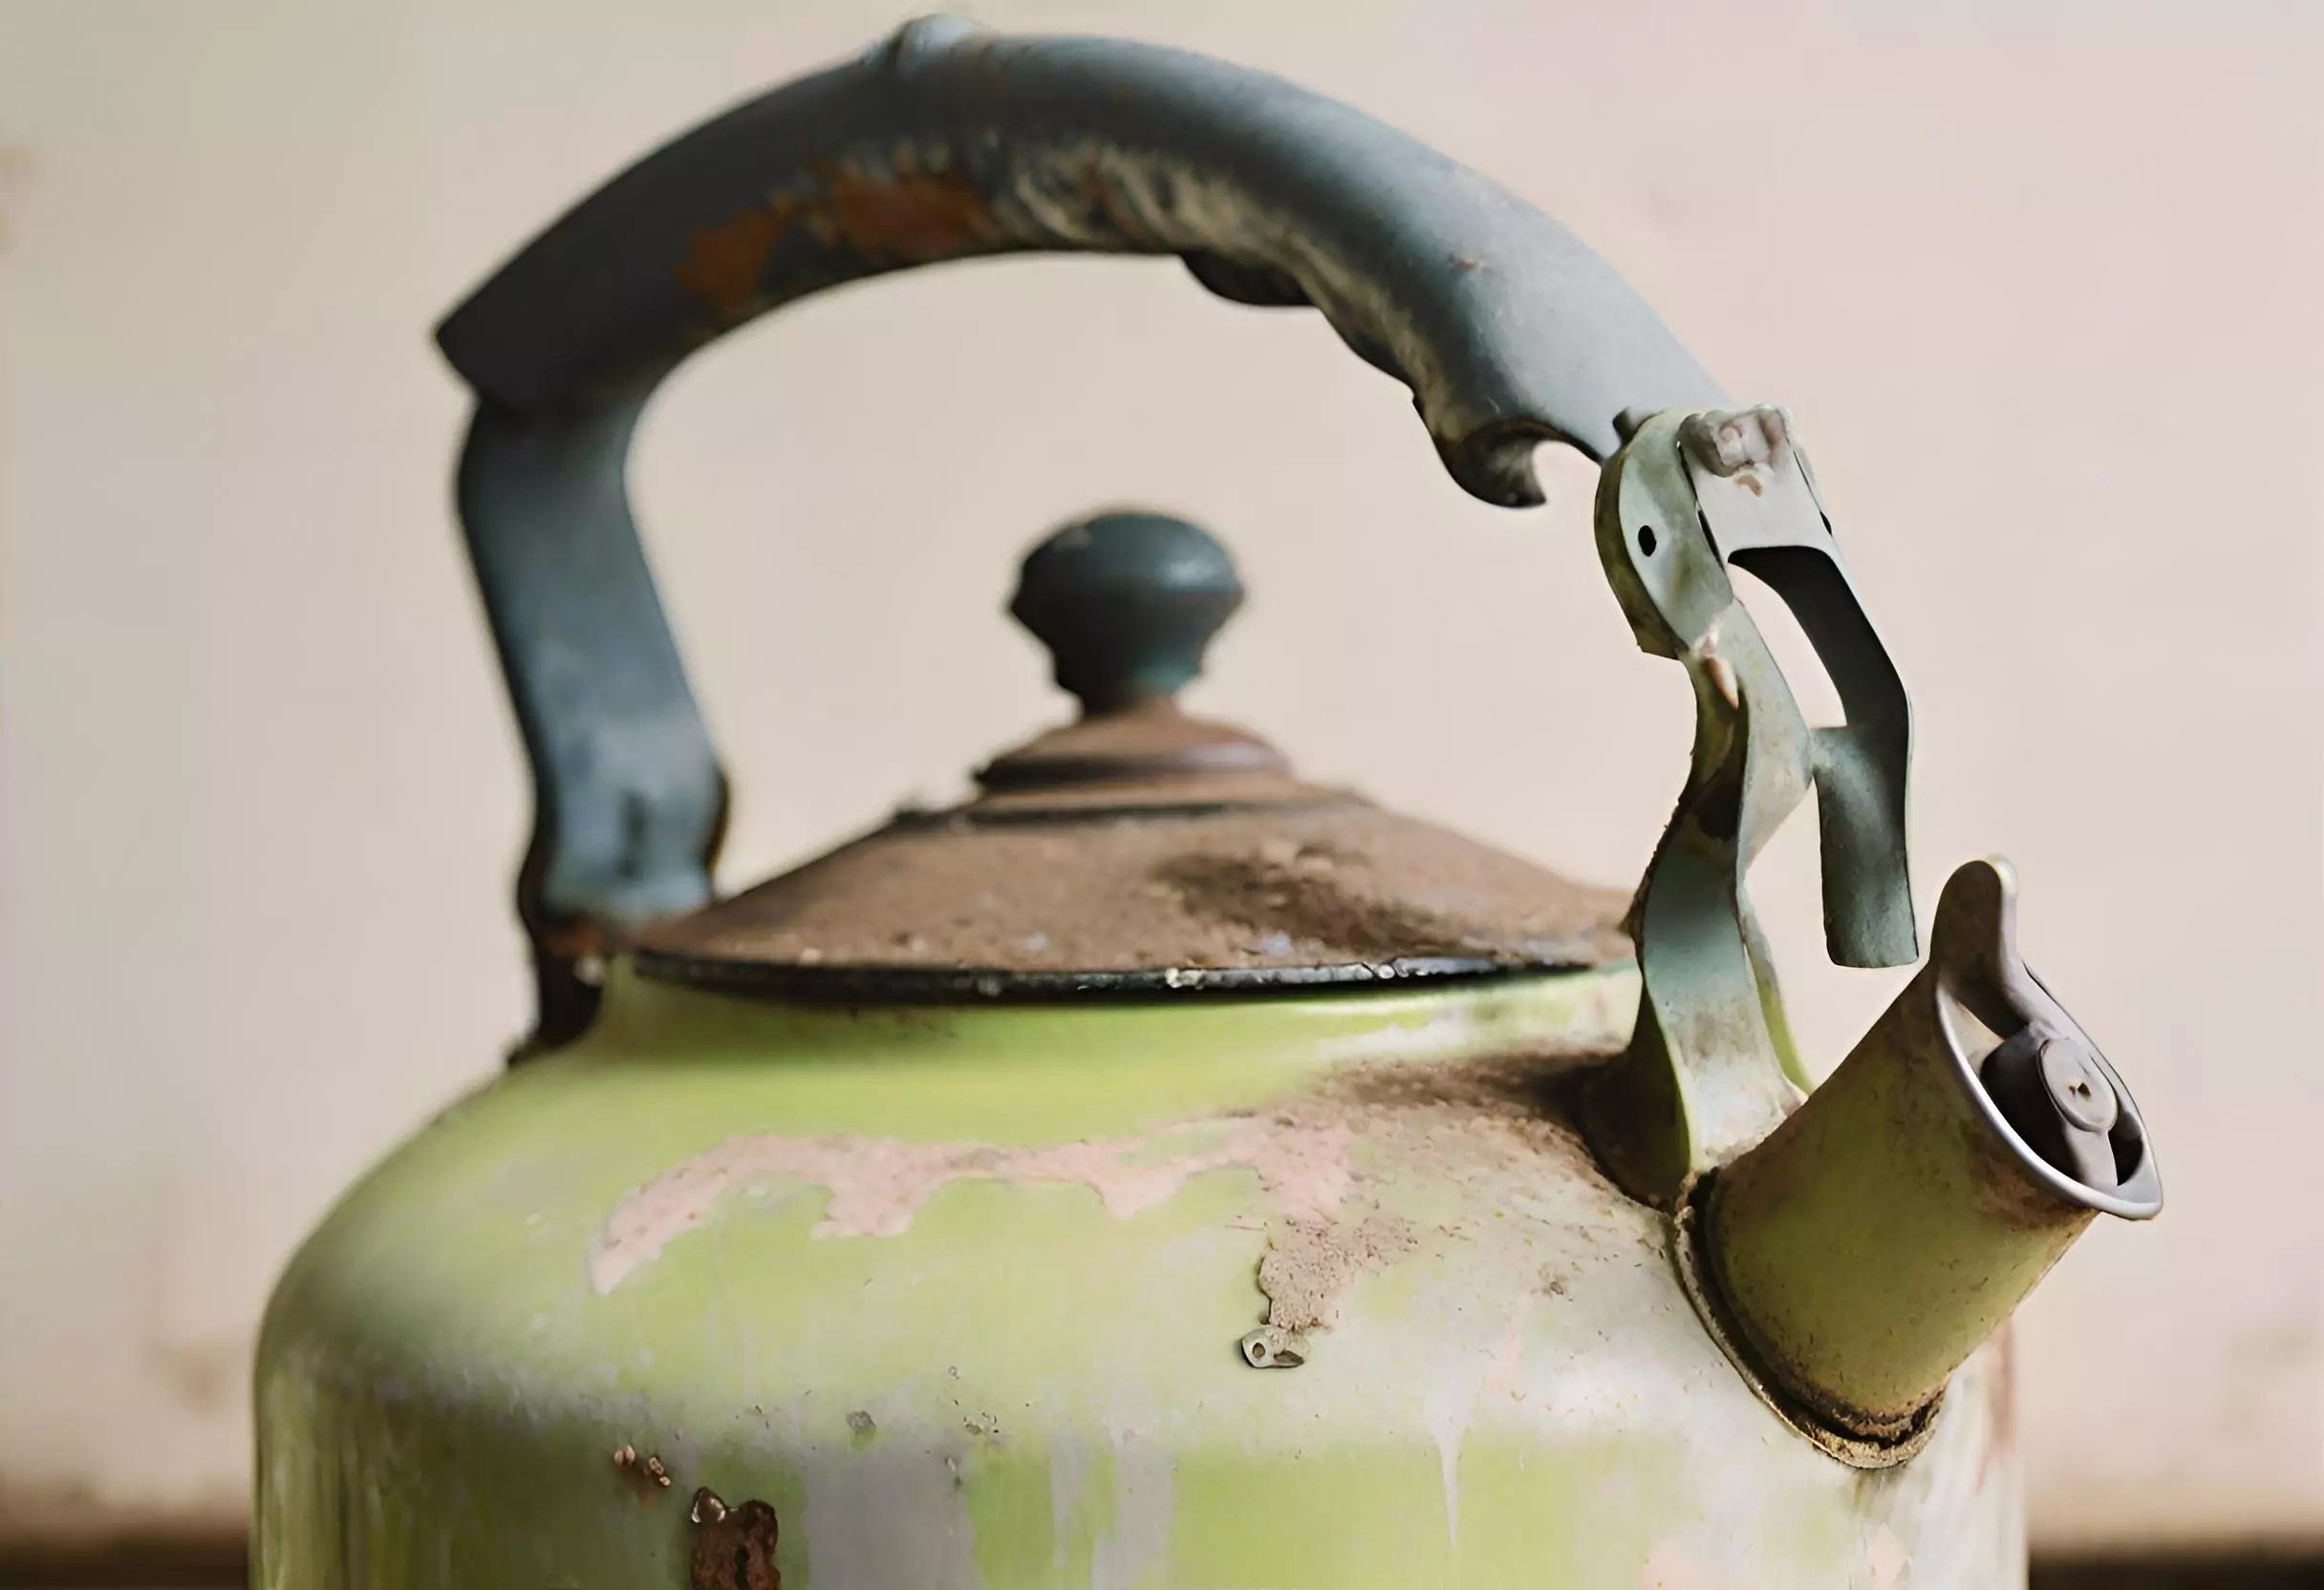 how to clean and descale a kettle